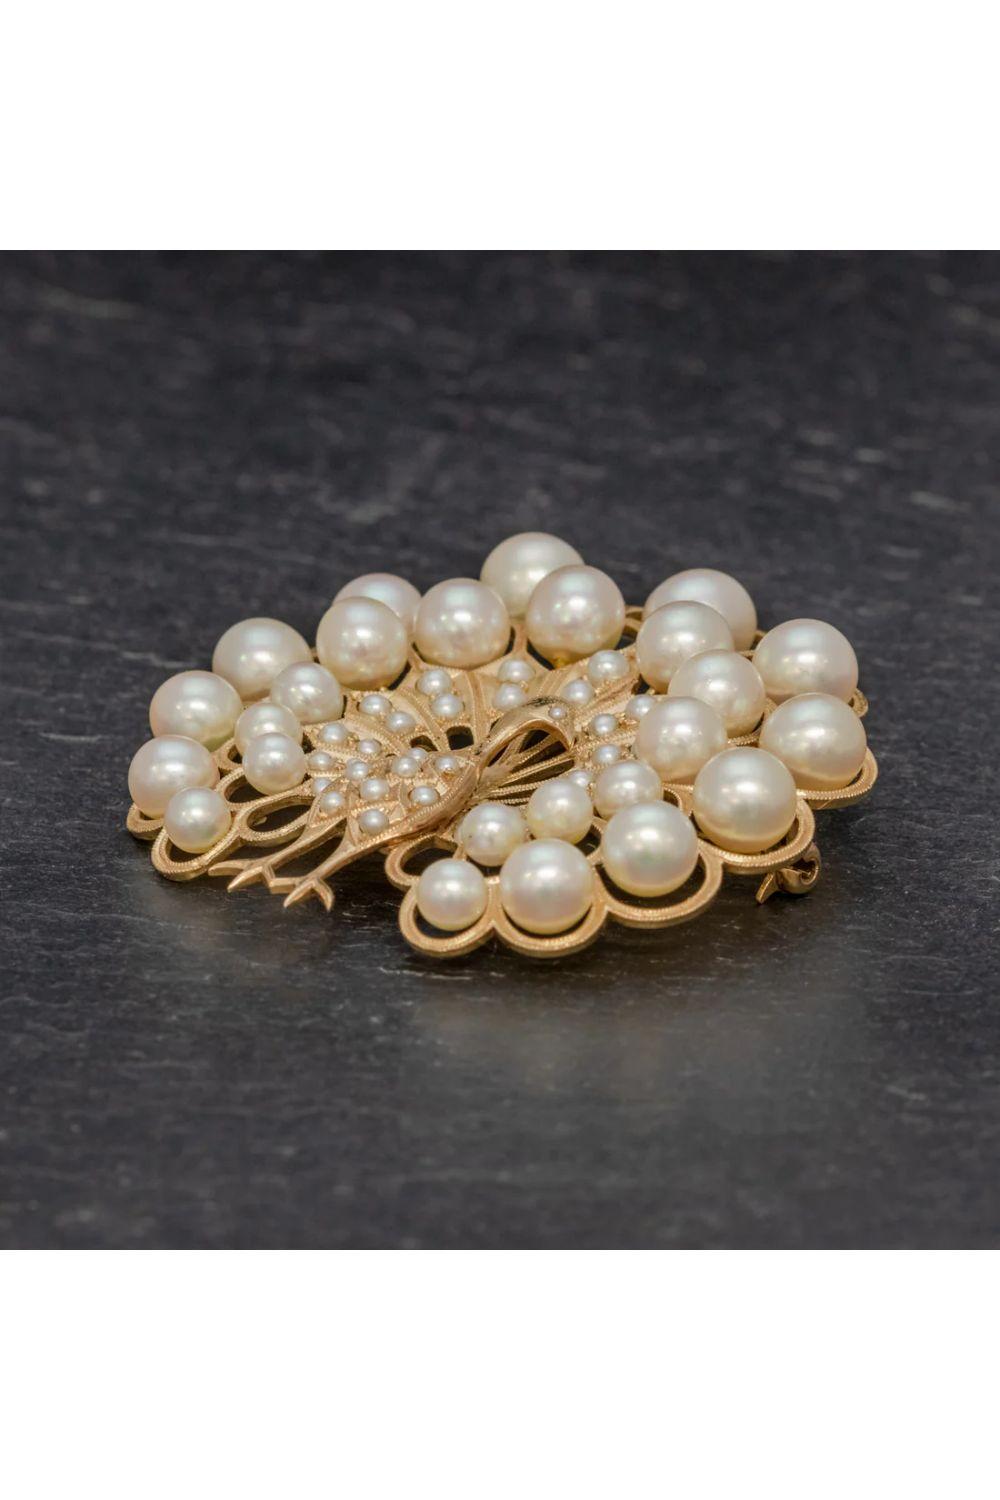 Retro Vintage Pearl Peacock Brooch in 14 Carat Gold For Sale